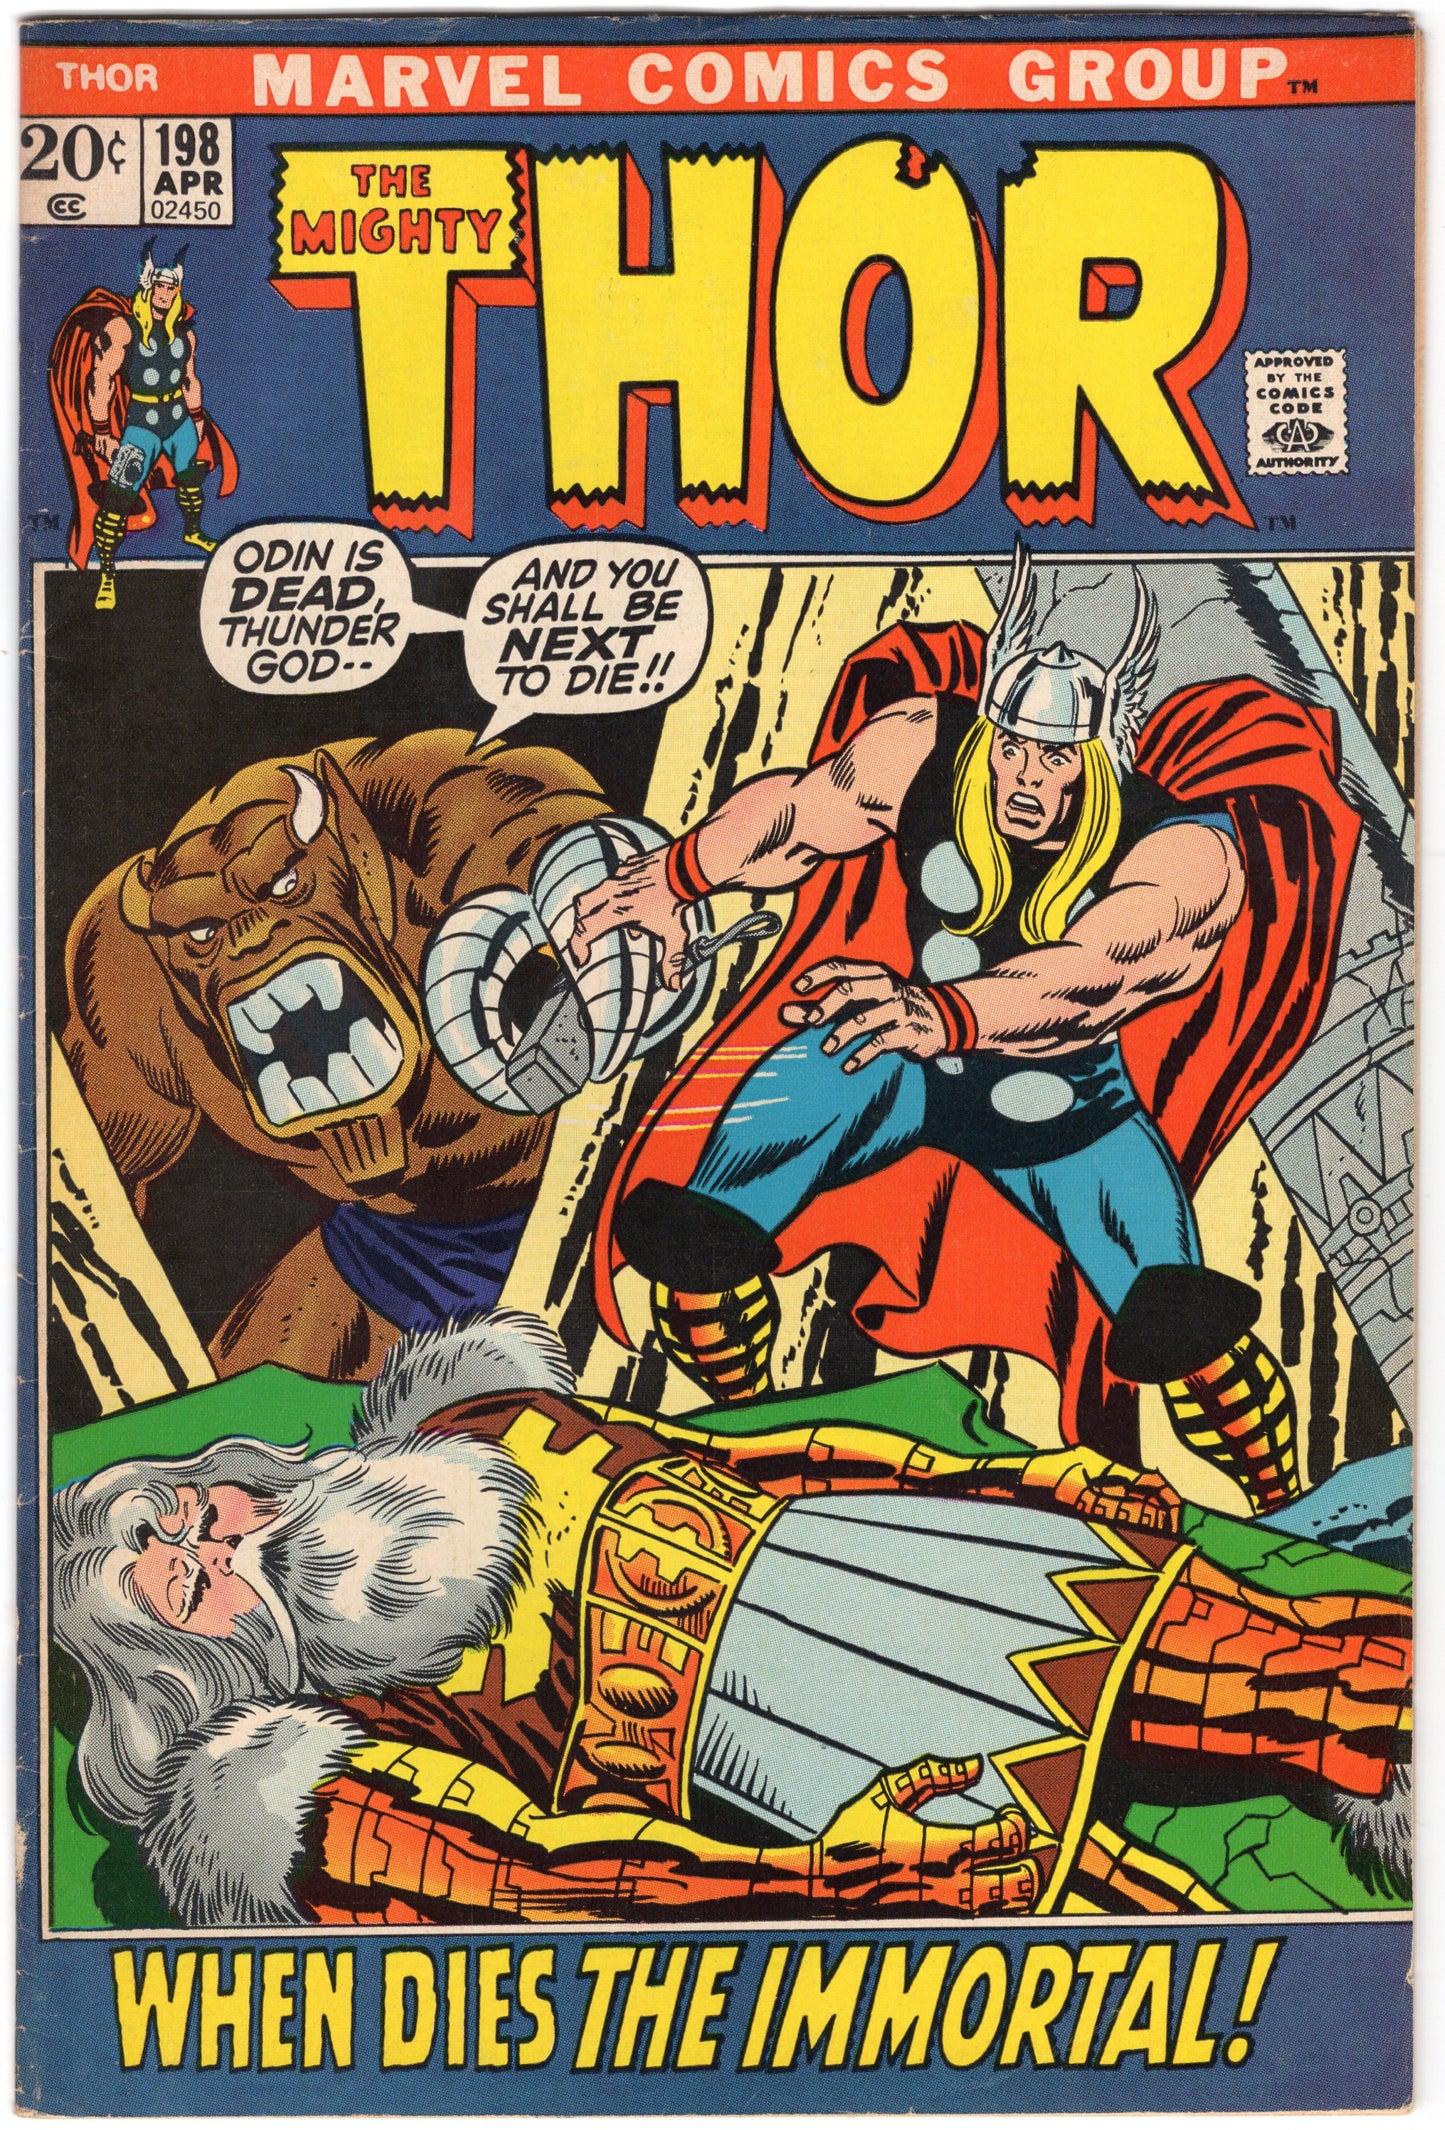 Thor - Issue #198 "When Dies The Immortal!" (Apr. 1972 - Marvel Comics) FN-